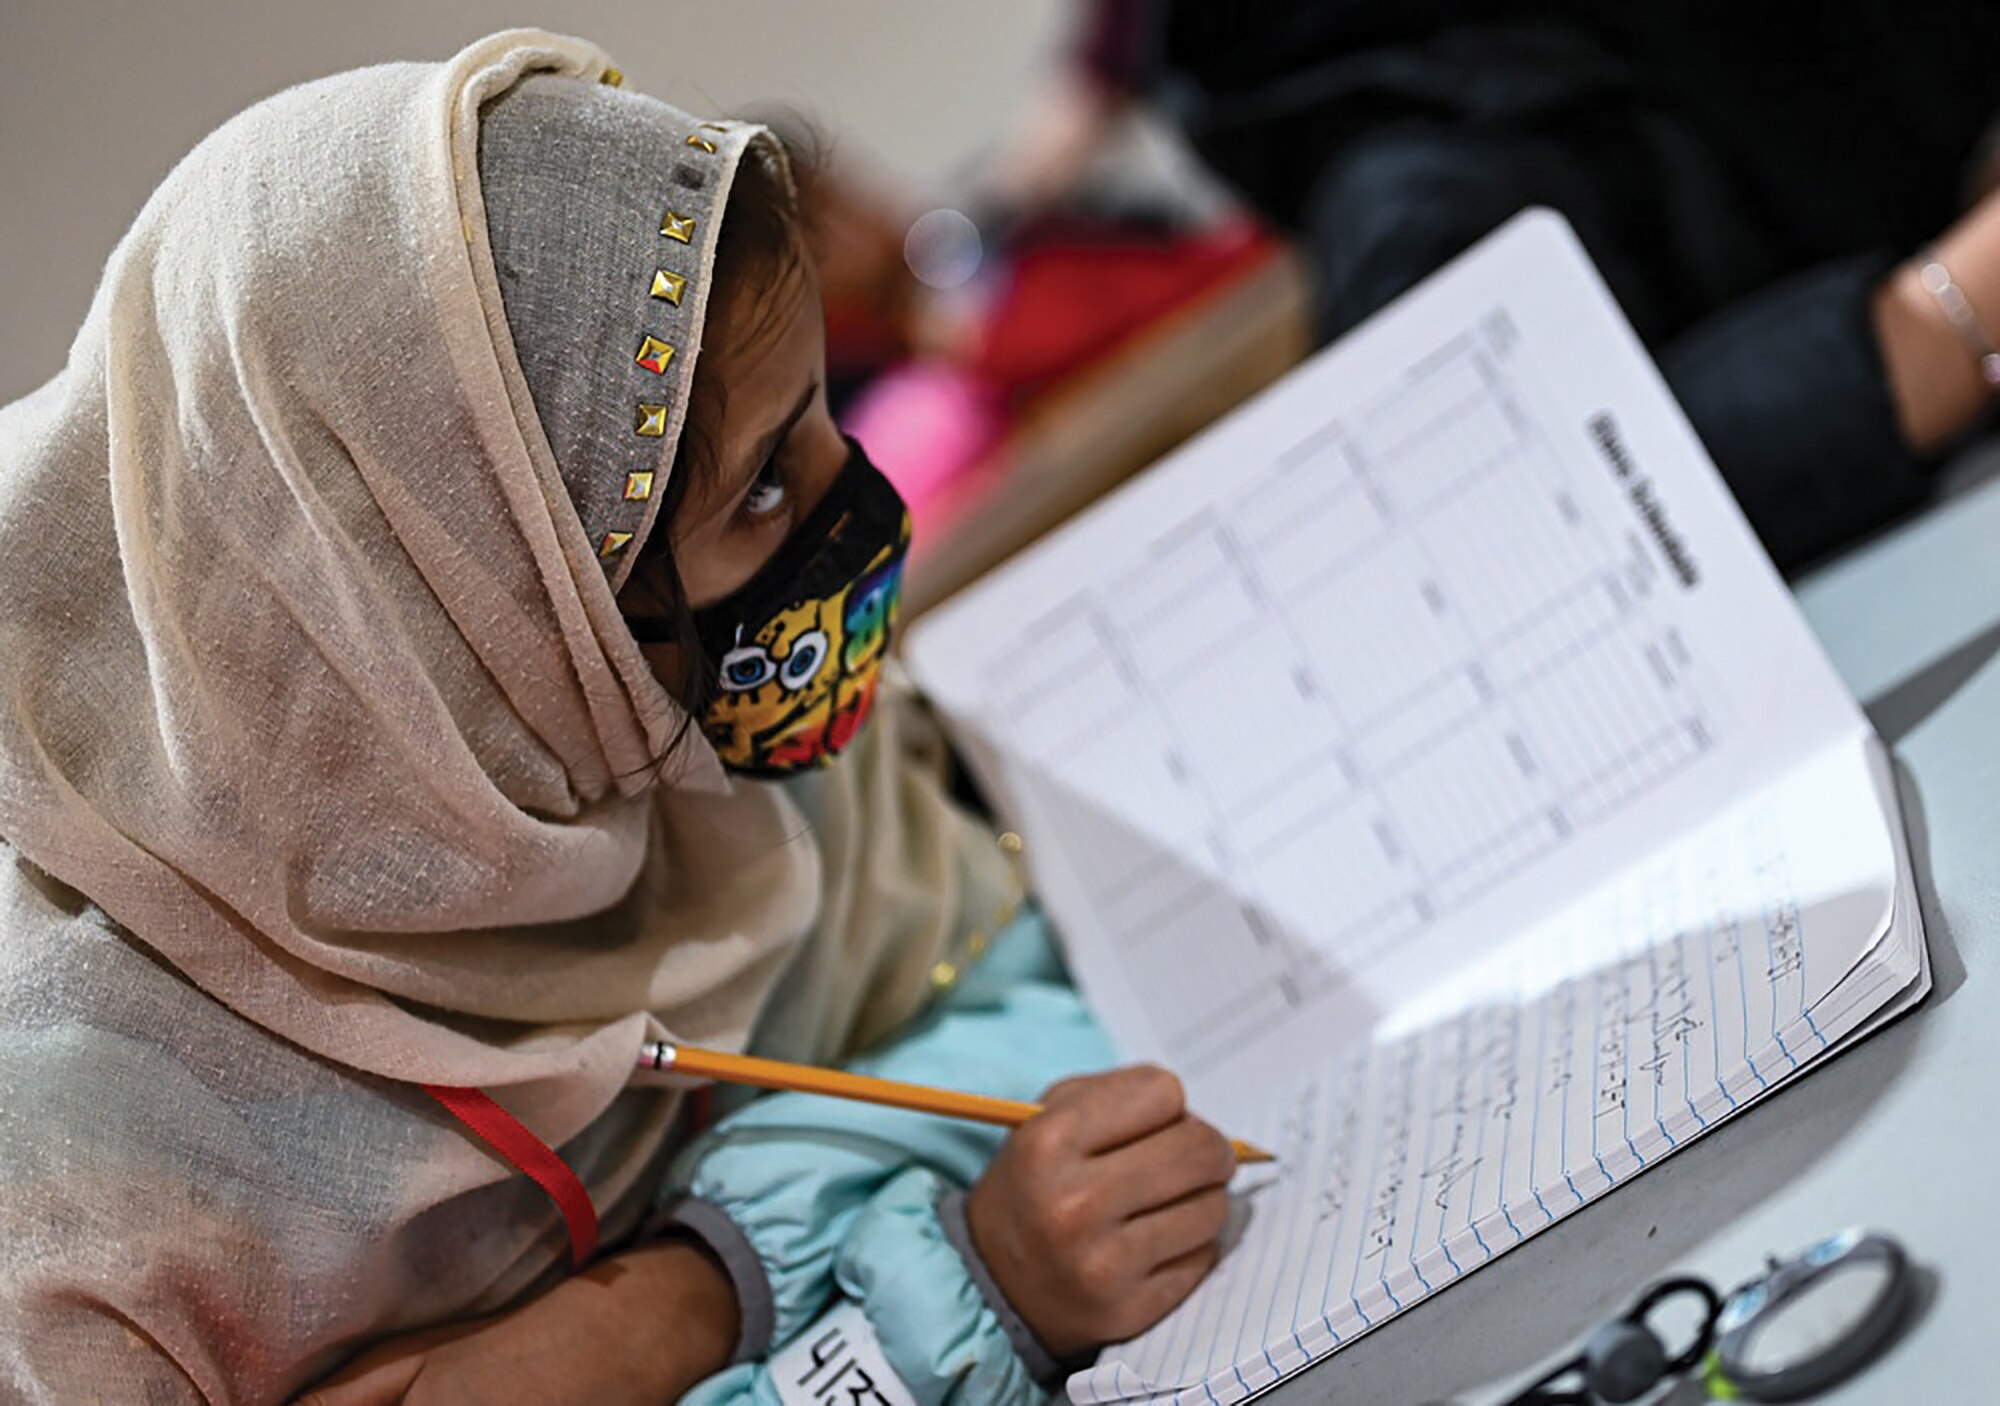 An Afghan student writes out her ABCs during community-based education in Liberty Village, Joint Base McGuire-Dix-Lakehurst, New Jersey, Dec. 20, 2021.